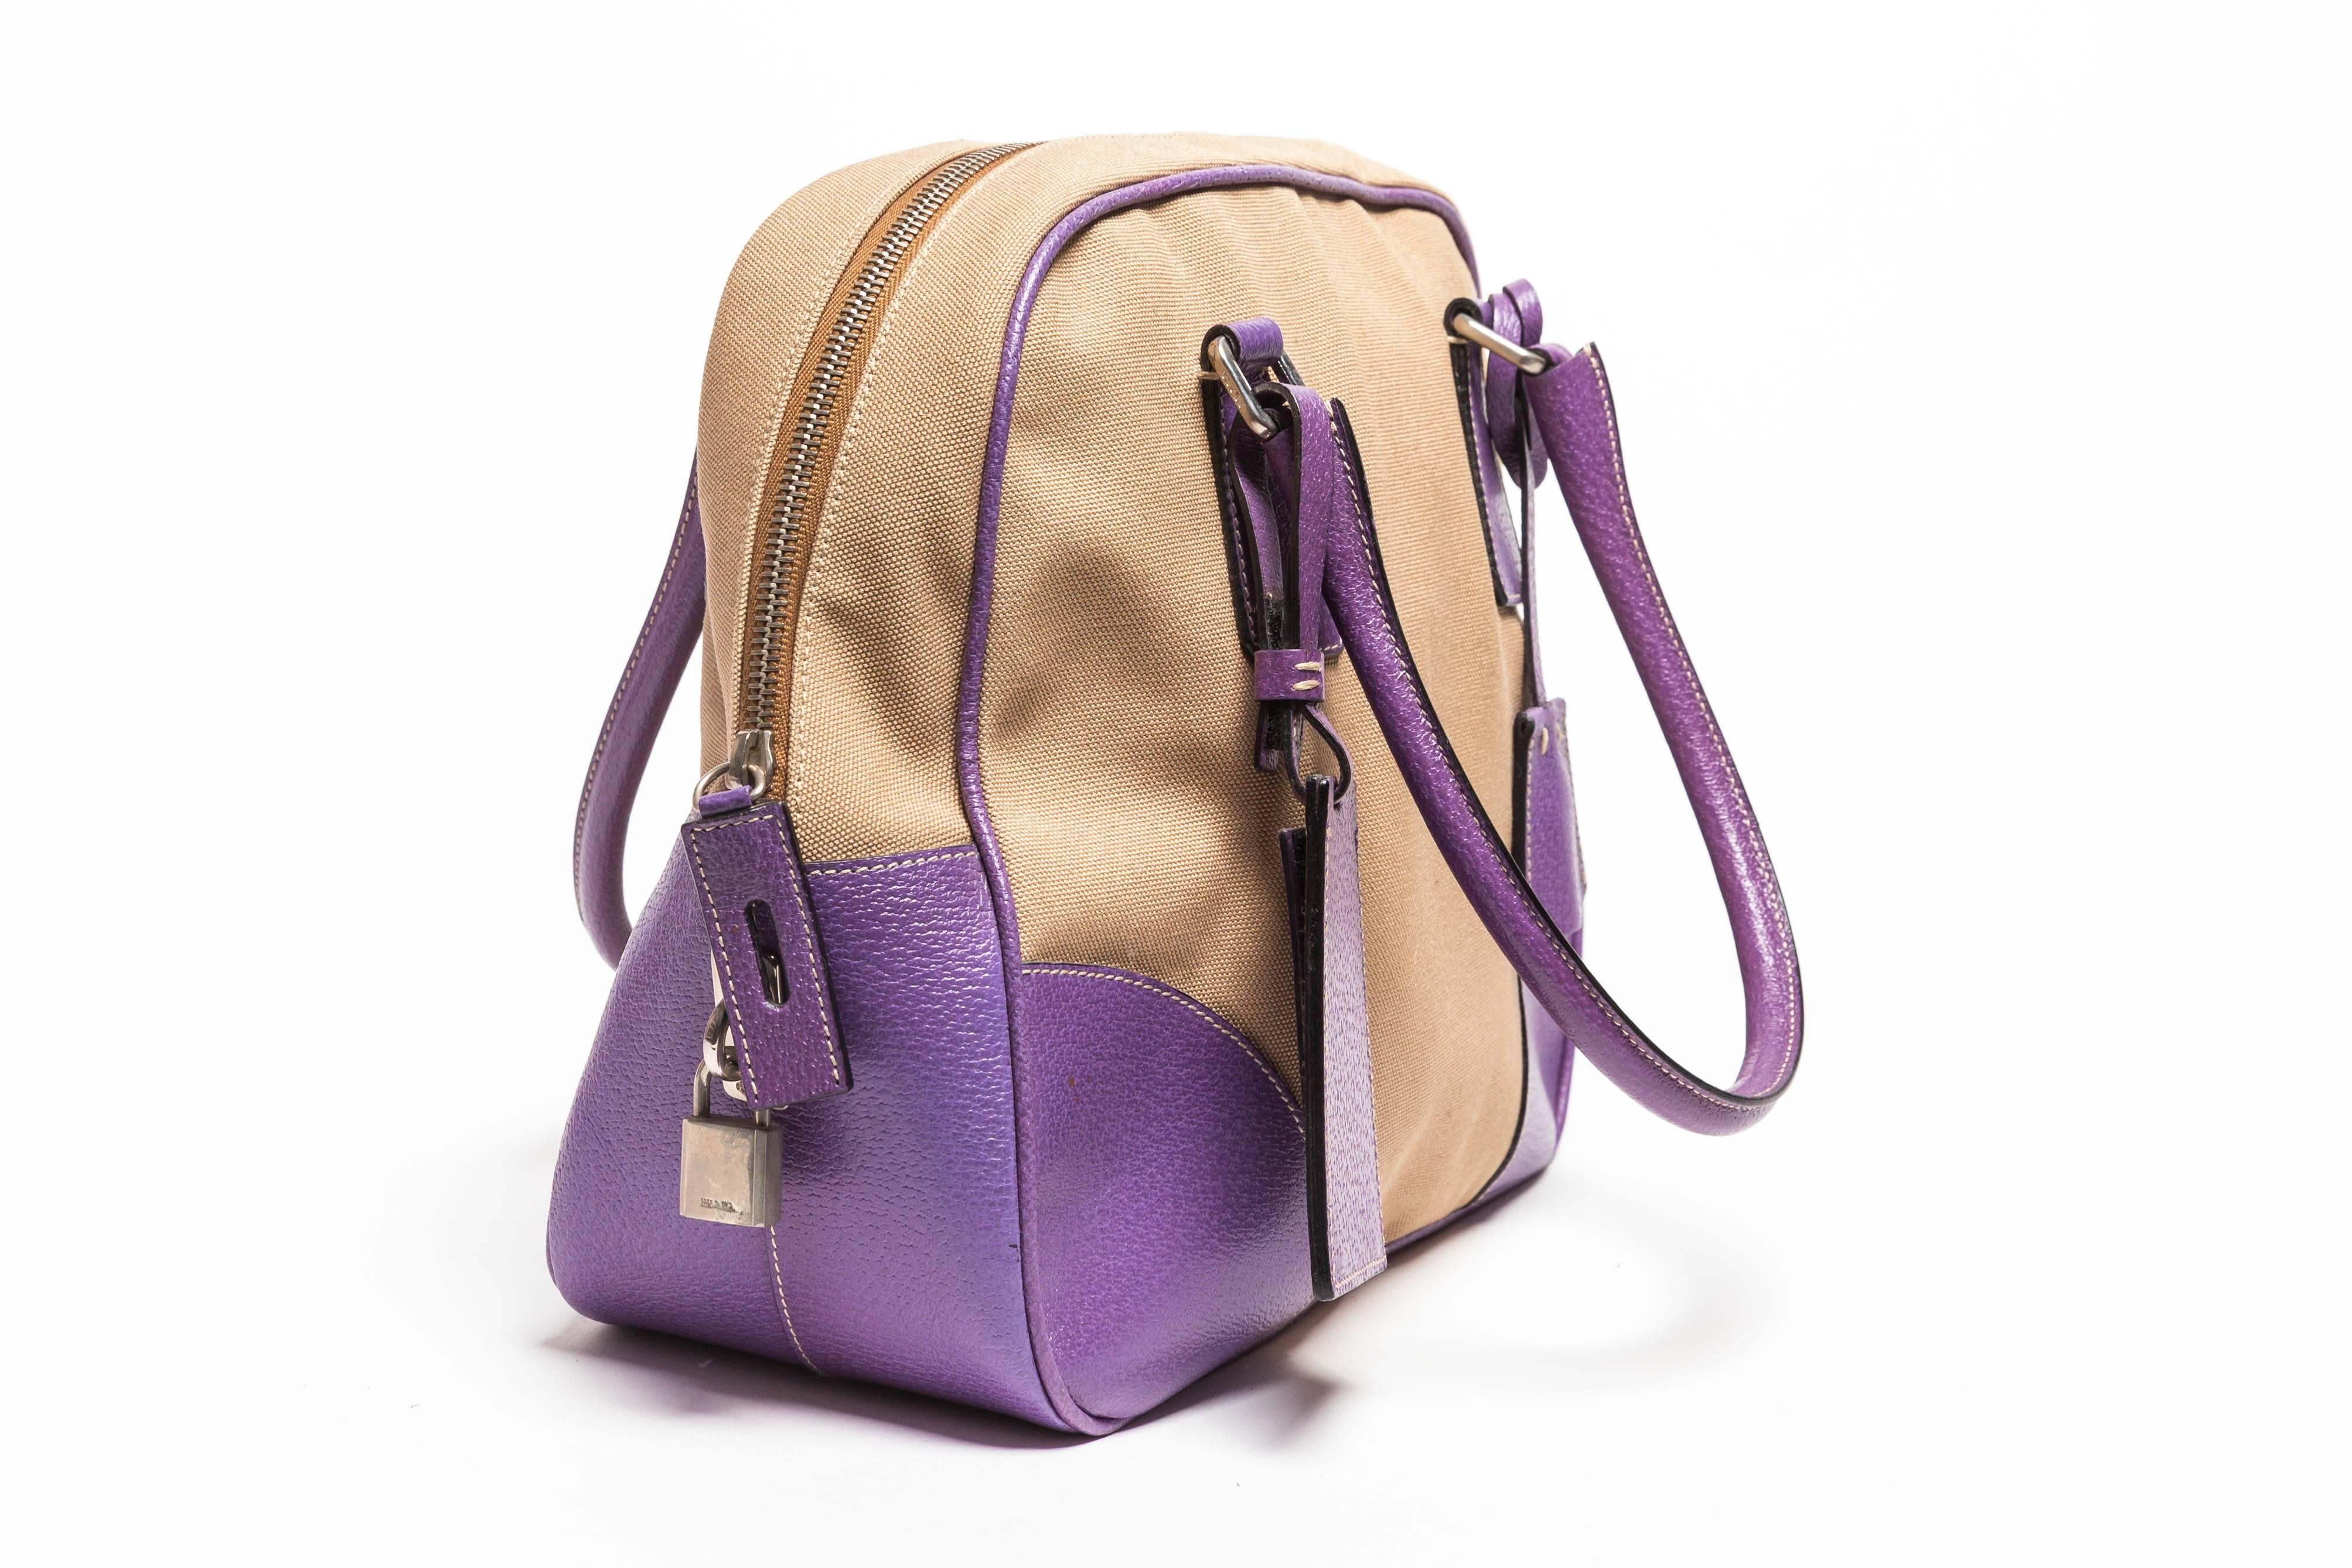 Prada Canvas and Purple Leather Top Handle Bag with Lock,  Keys and Luggage Tag In Good Condition For Sale In Westhampton Beach, NY